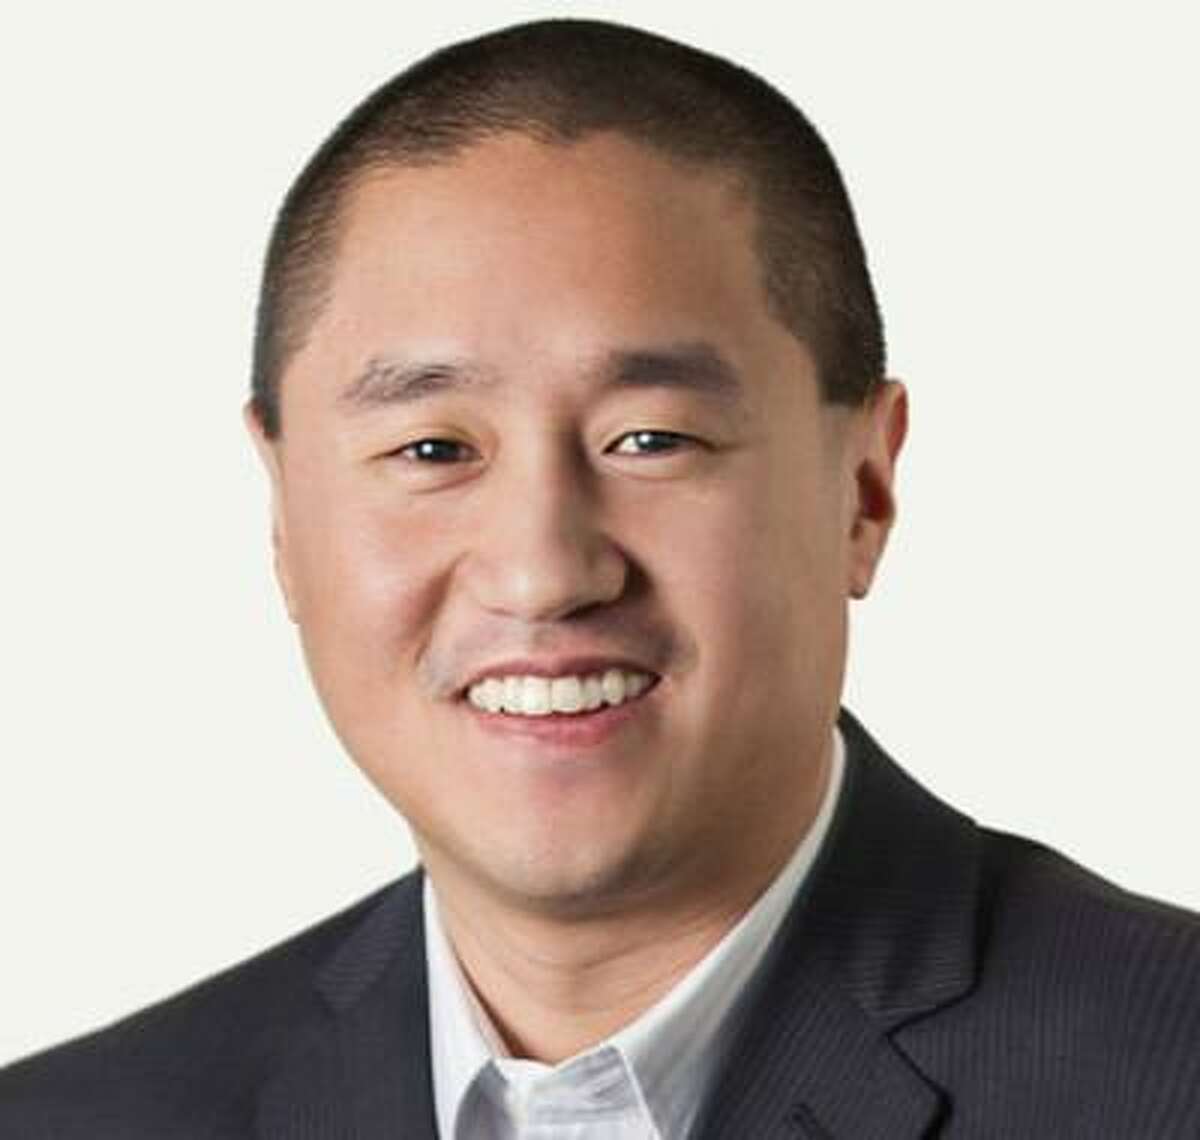 One of the co-founders of the charity, 4-CT, Ted Yang, (pictured), writes this letter about what it does for other people in the community that it is around, which includes the Town of New Canaan.